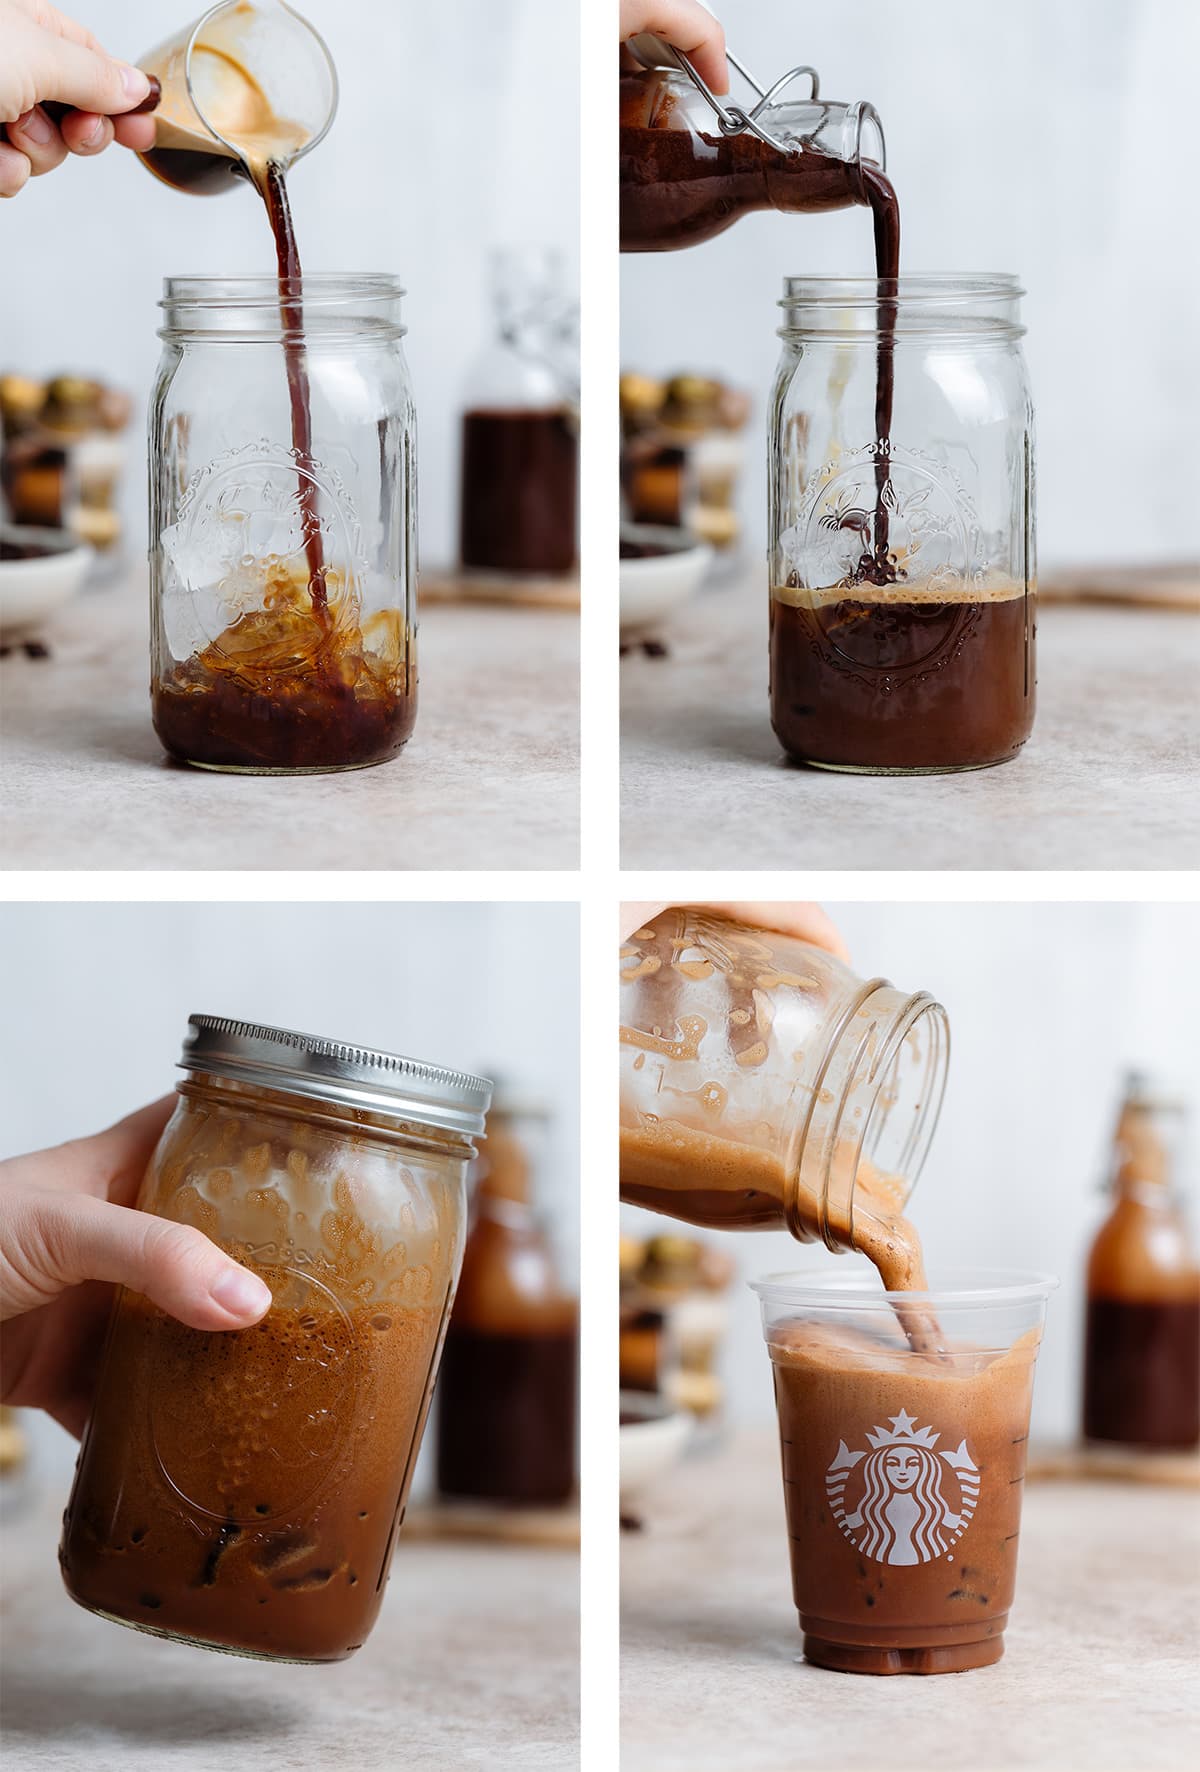 Espresso and chocolate syrup being poured into a tall mason jar and being shaken up and poured into a Starbucks cup.